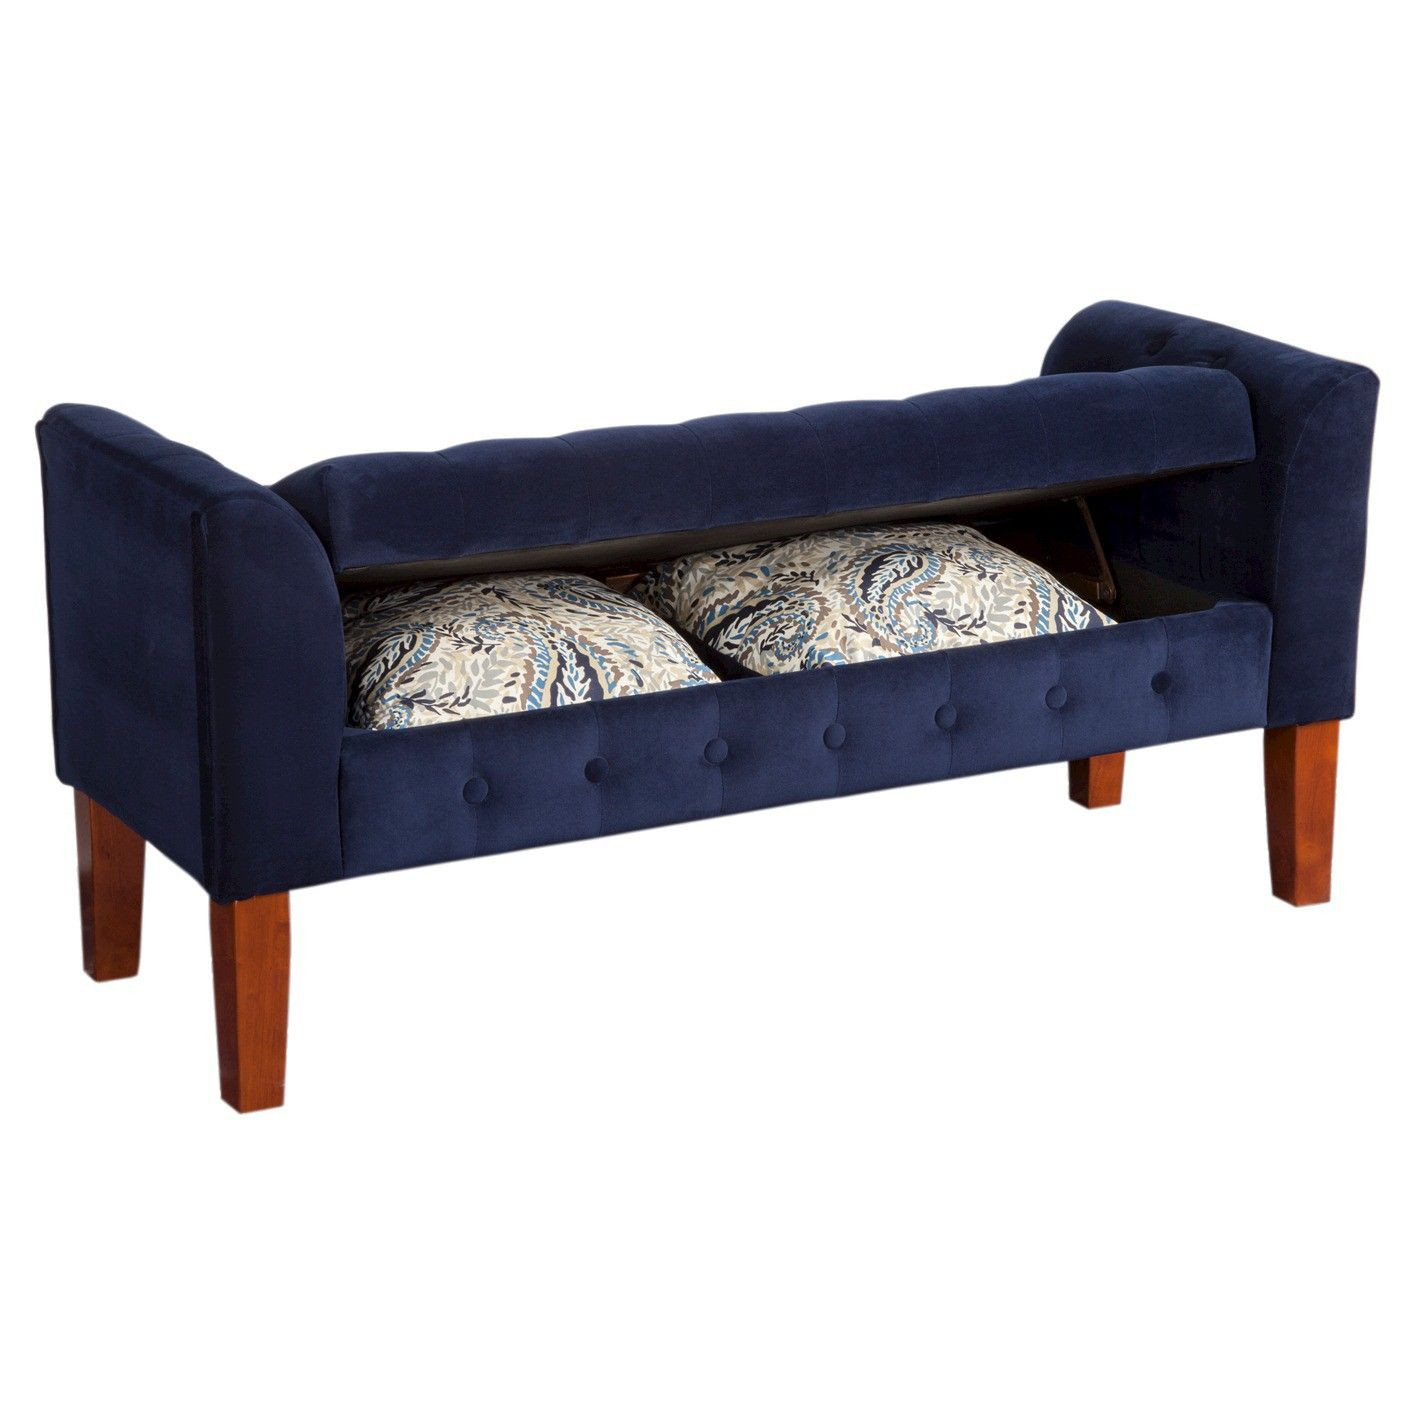 Tufted Storage Bench Target
 End of Bed Storage Bench Navy Tar